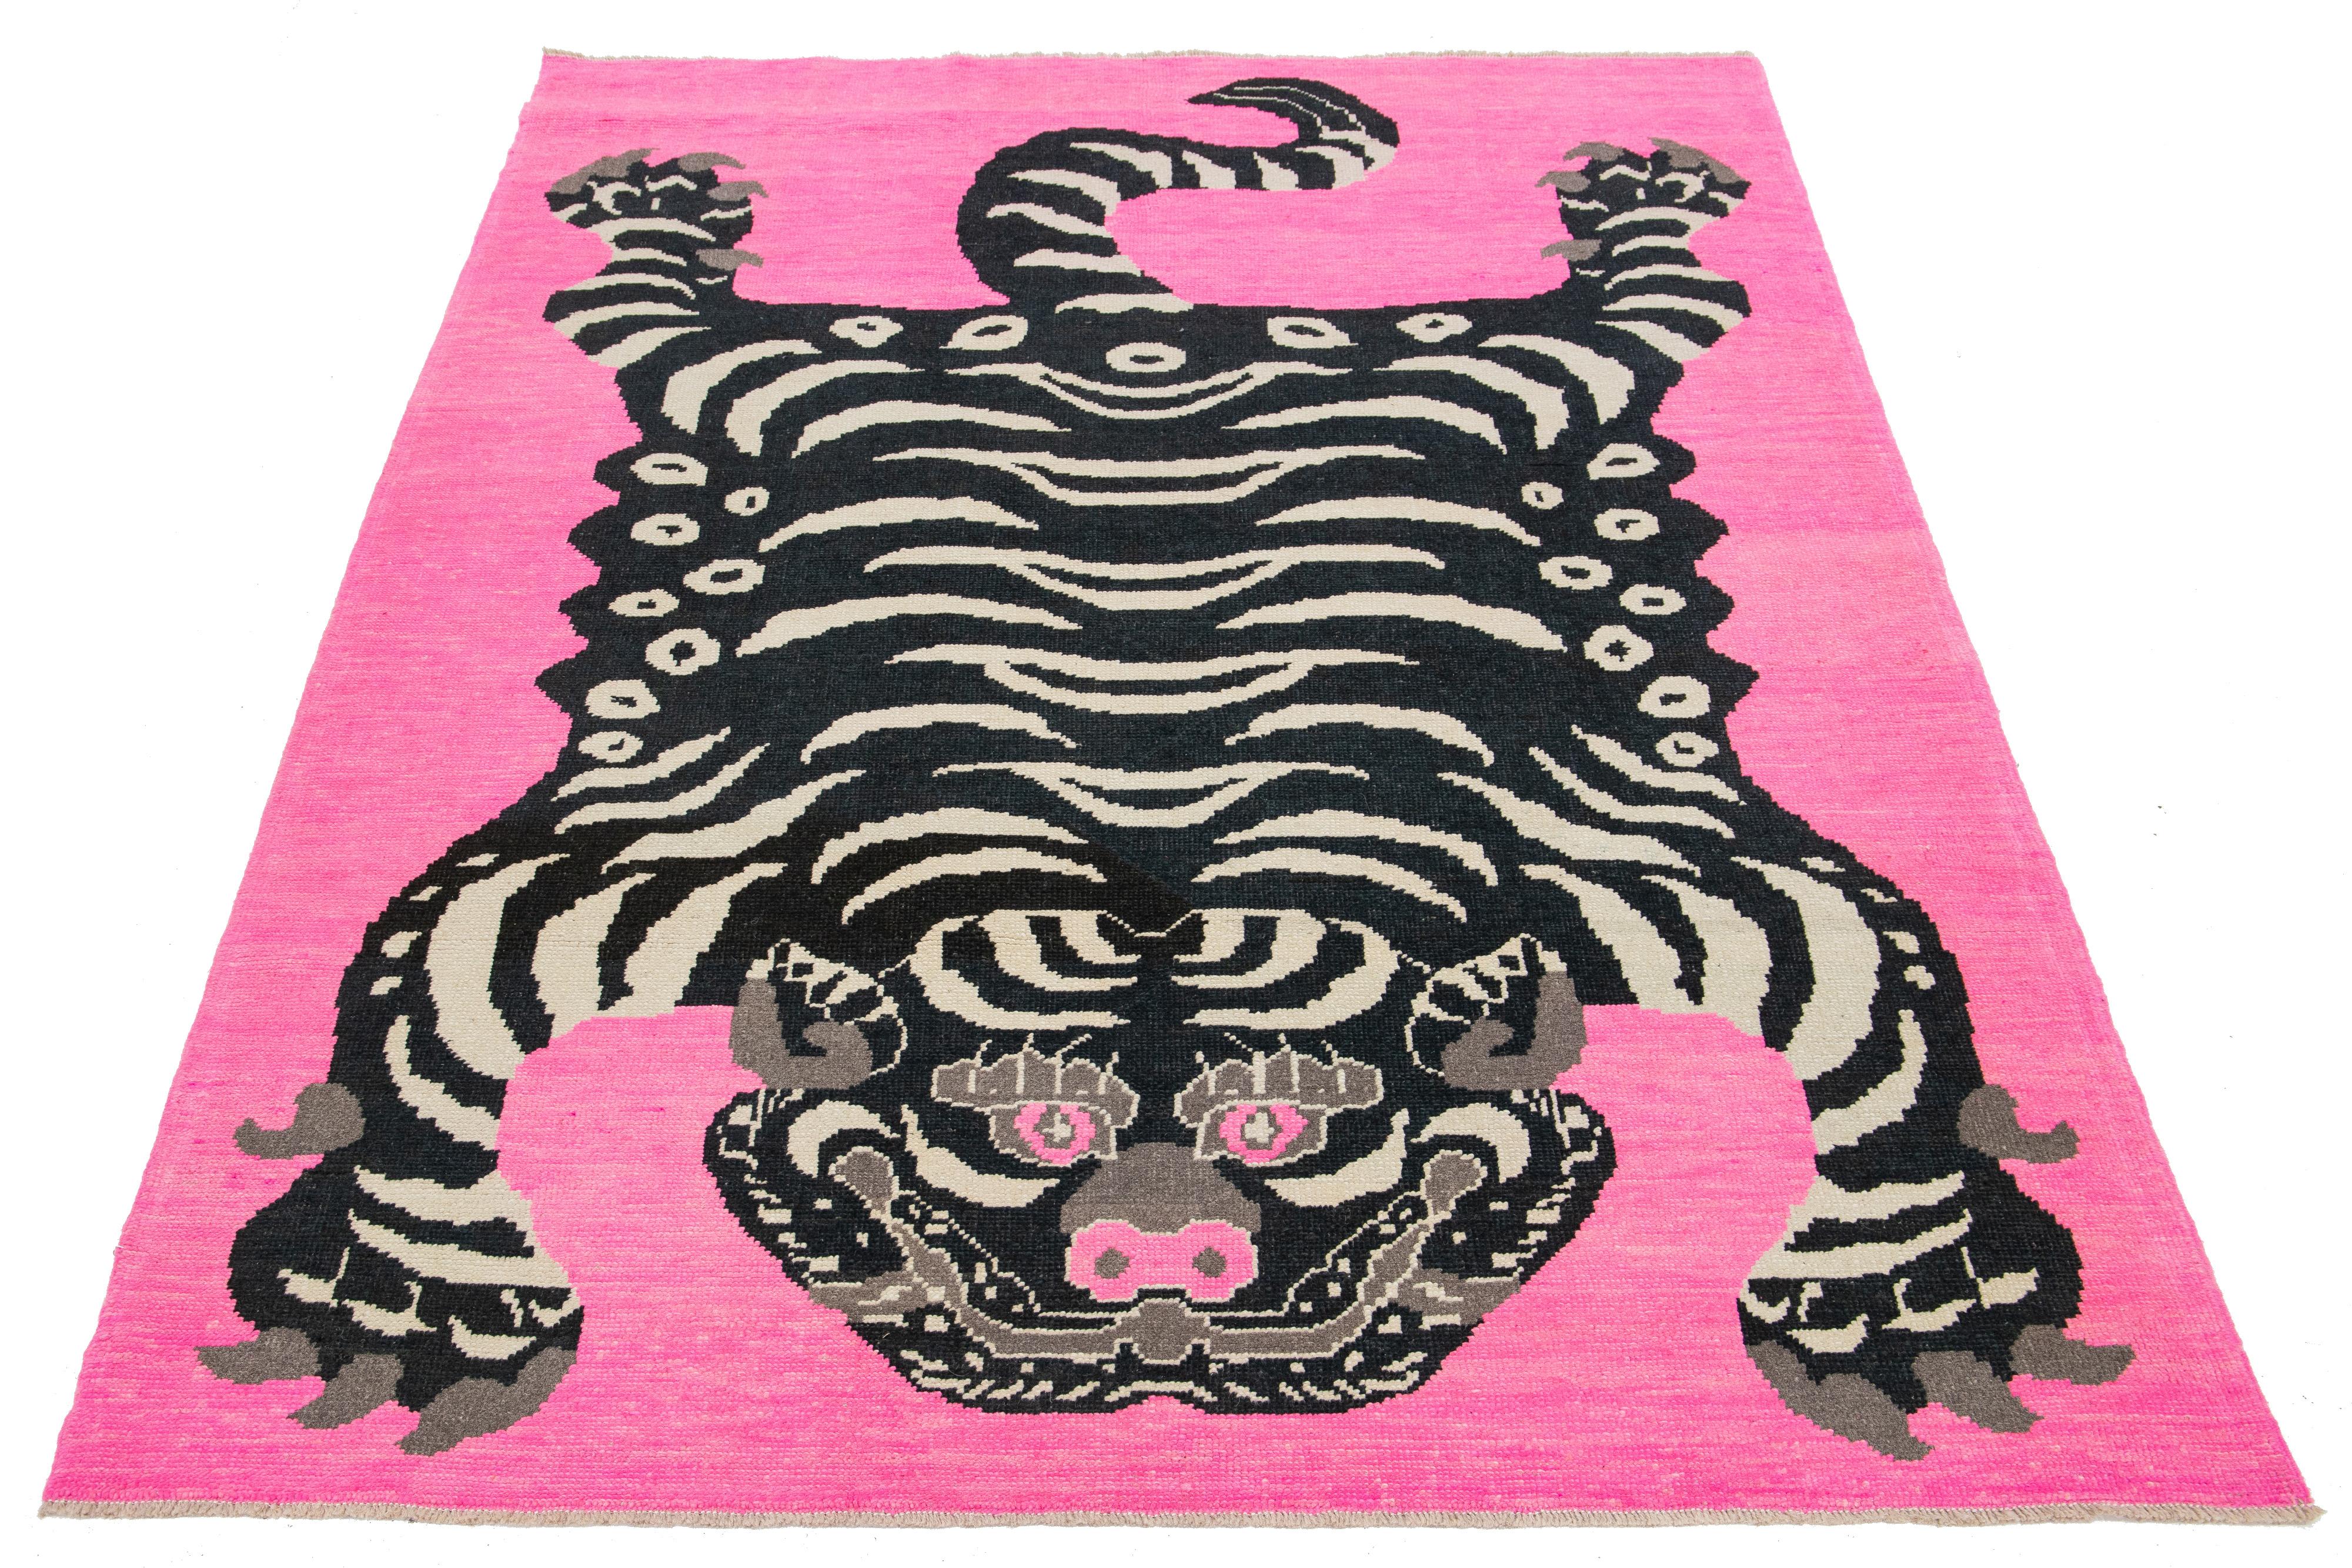 This room-size wool rug from Turkey showcases a stunning tiger pictorial design with a pink backdrop and accents in black and beige. It is meticulously handmade with attention to detail.

This rug measures 7'1